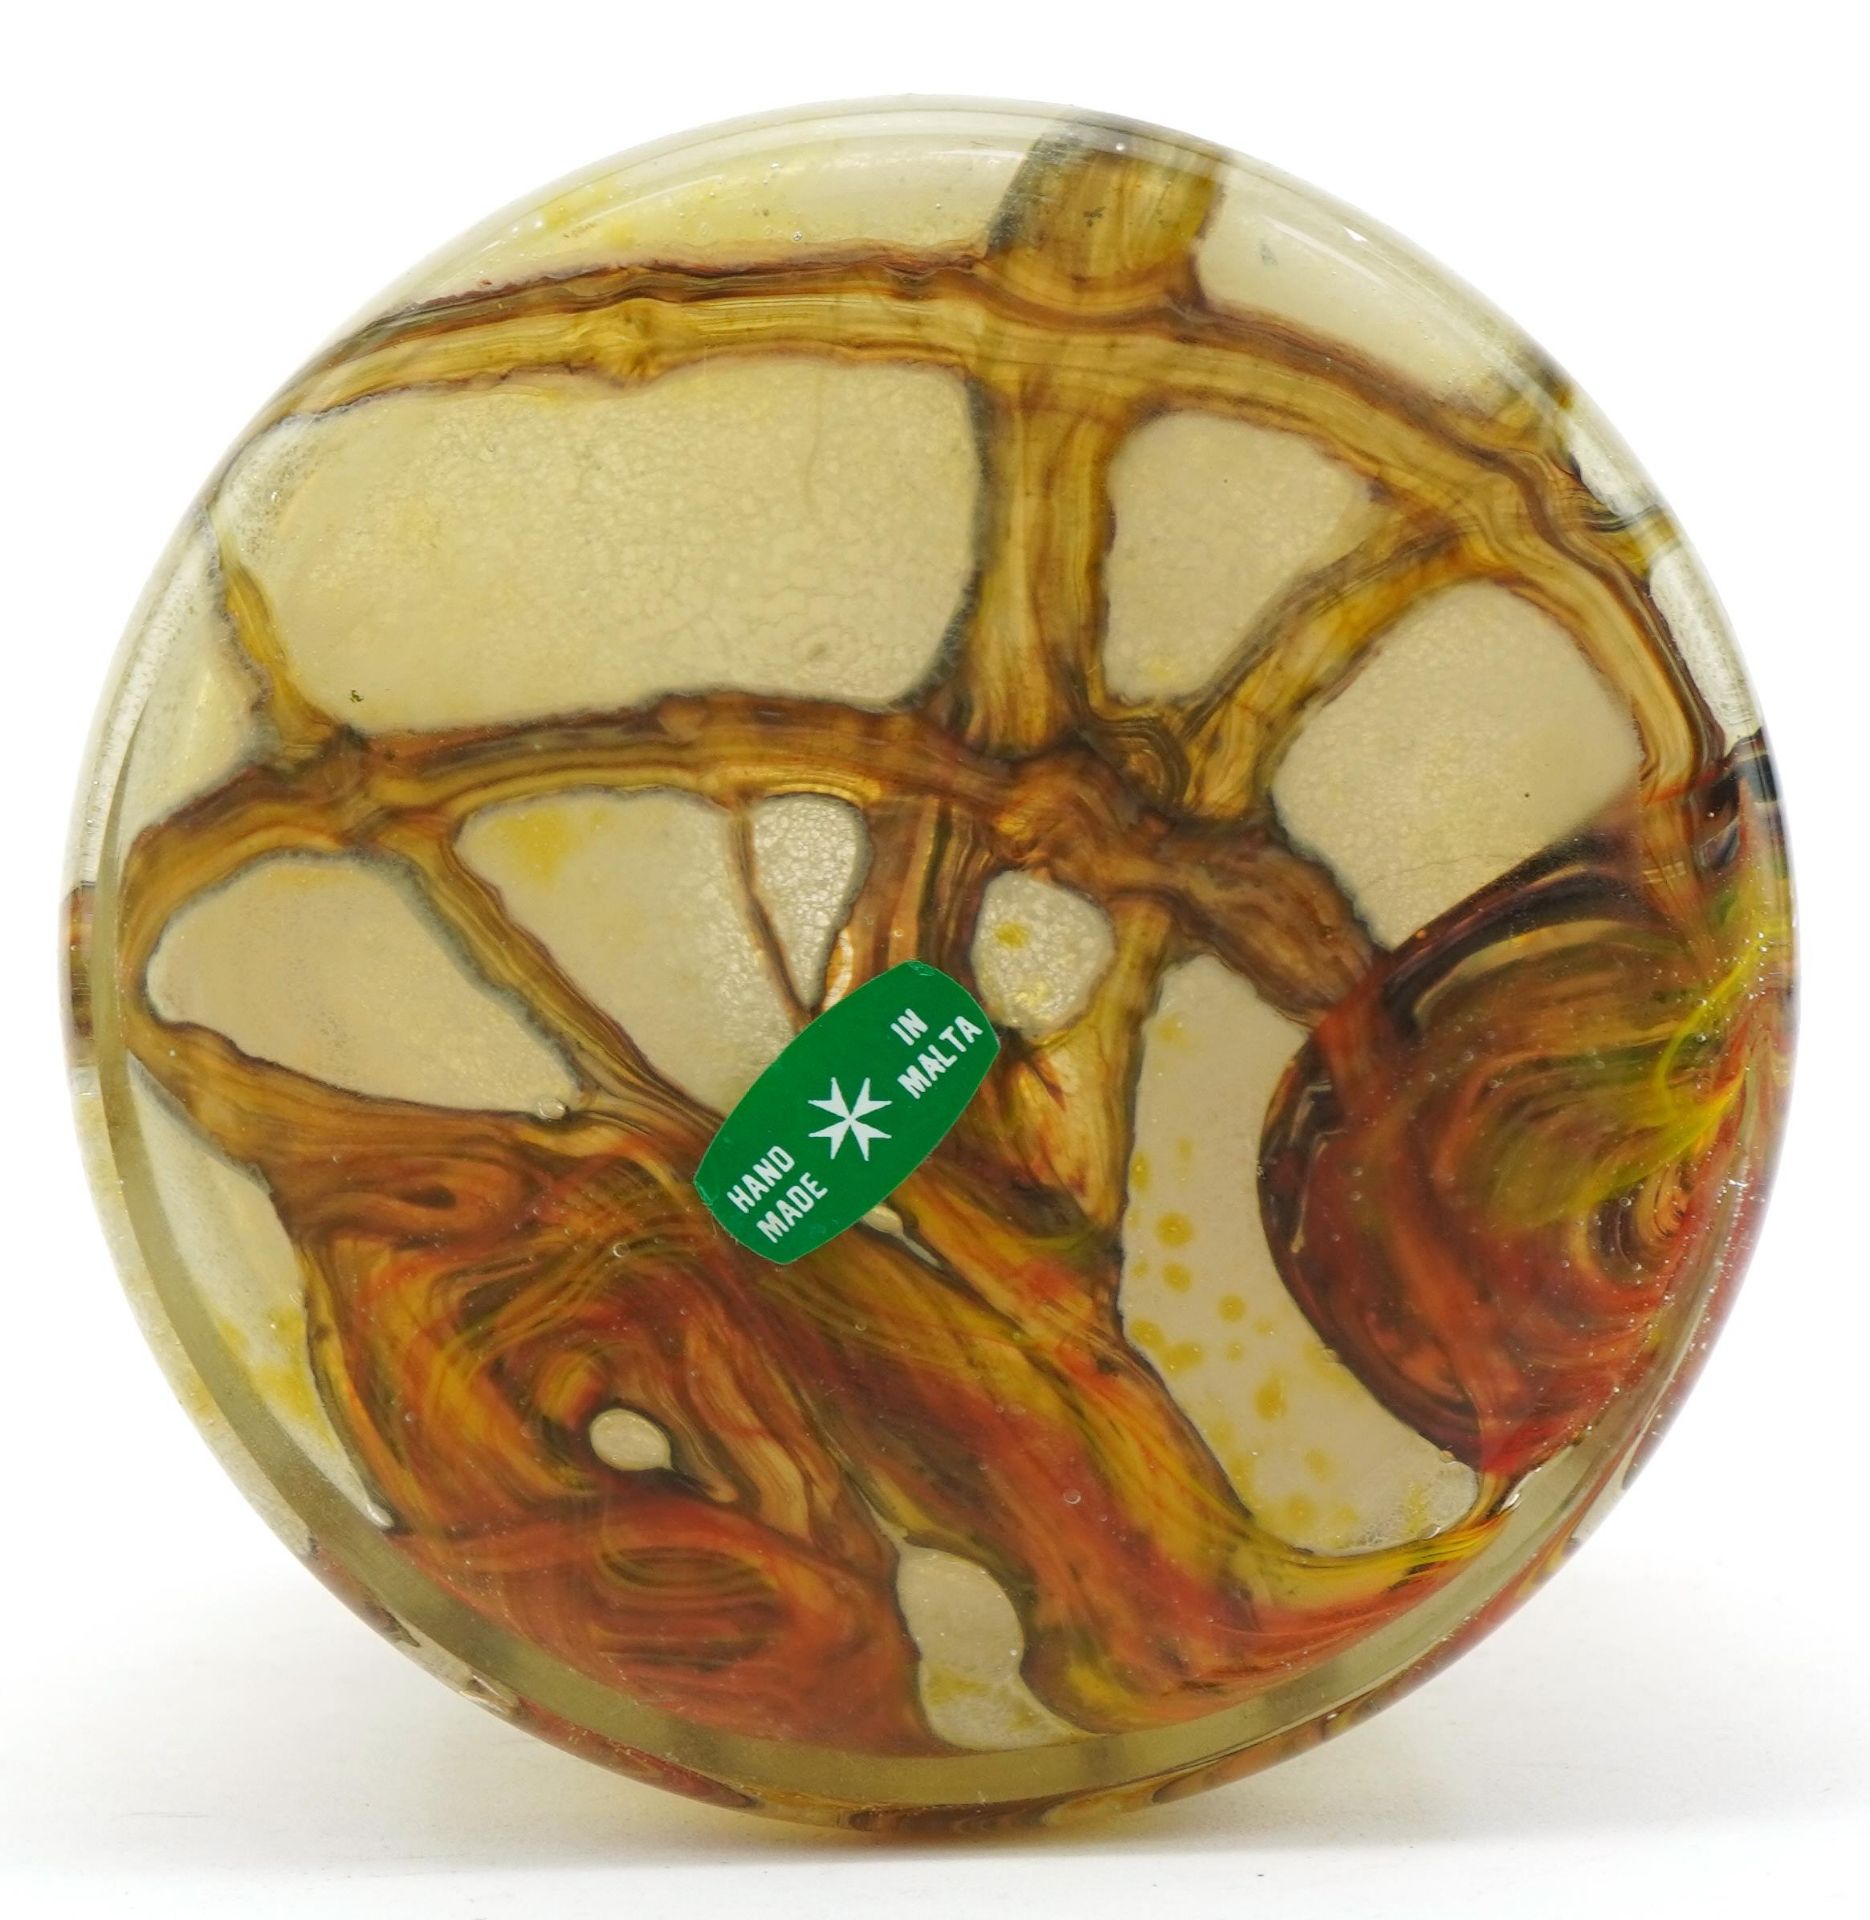 Attributed to Mdina, large mottled mallet art glass vase, Maltese paper label to the base, 23cm high - Image 3 of 4